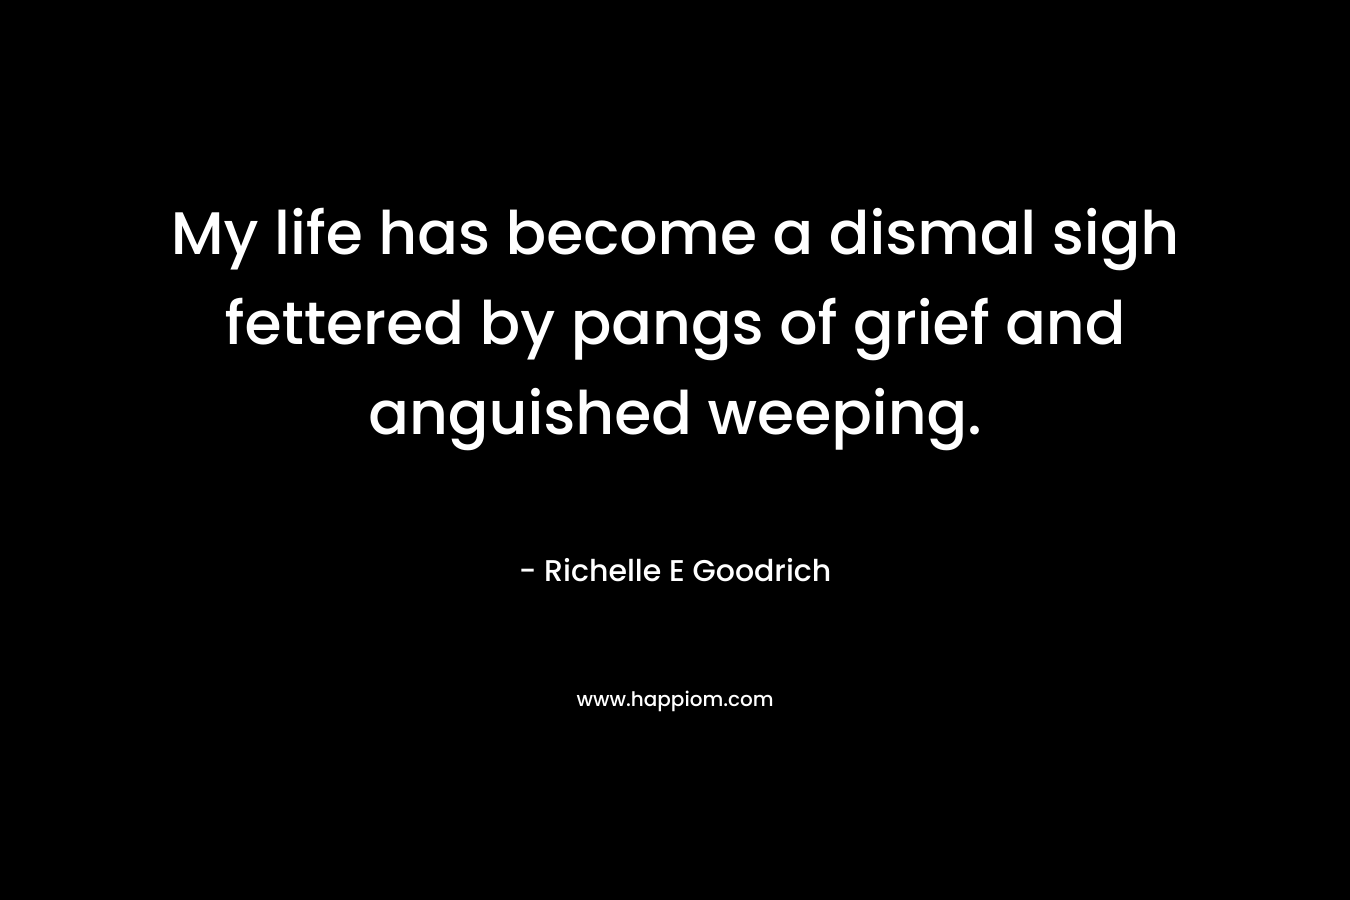 My life has become a dismal sigh fettered by pangs of grief and anguished weeping. – Richelle E Goodrich